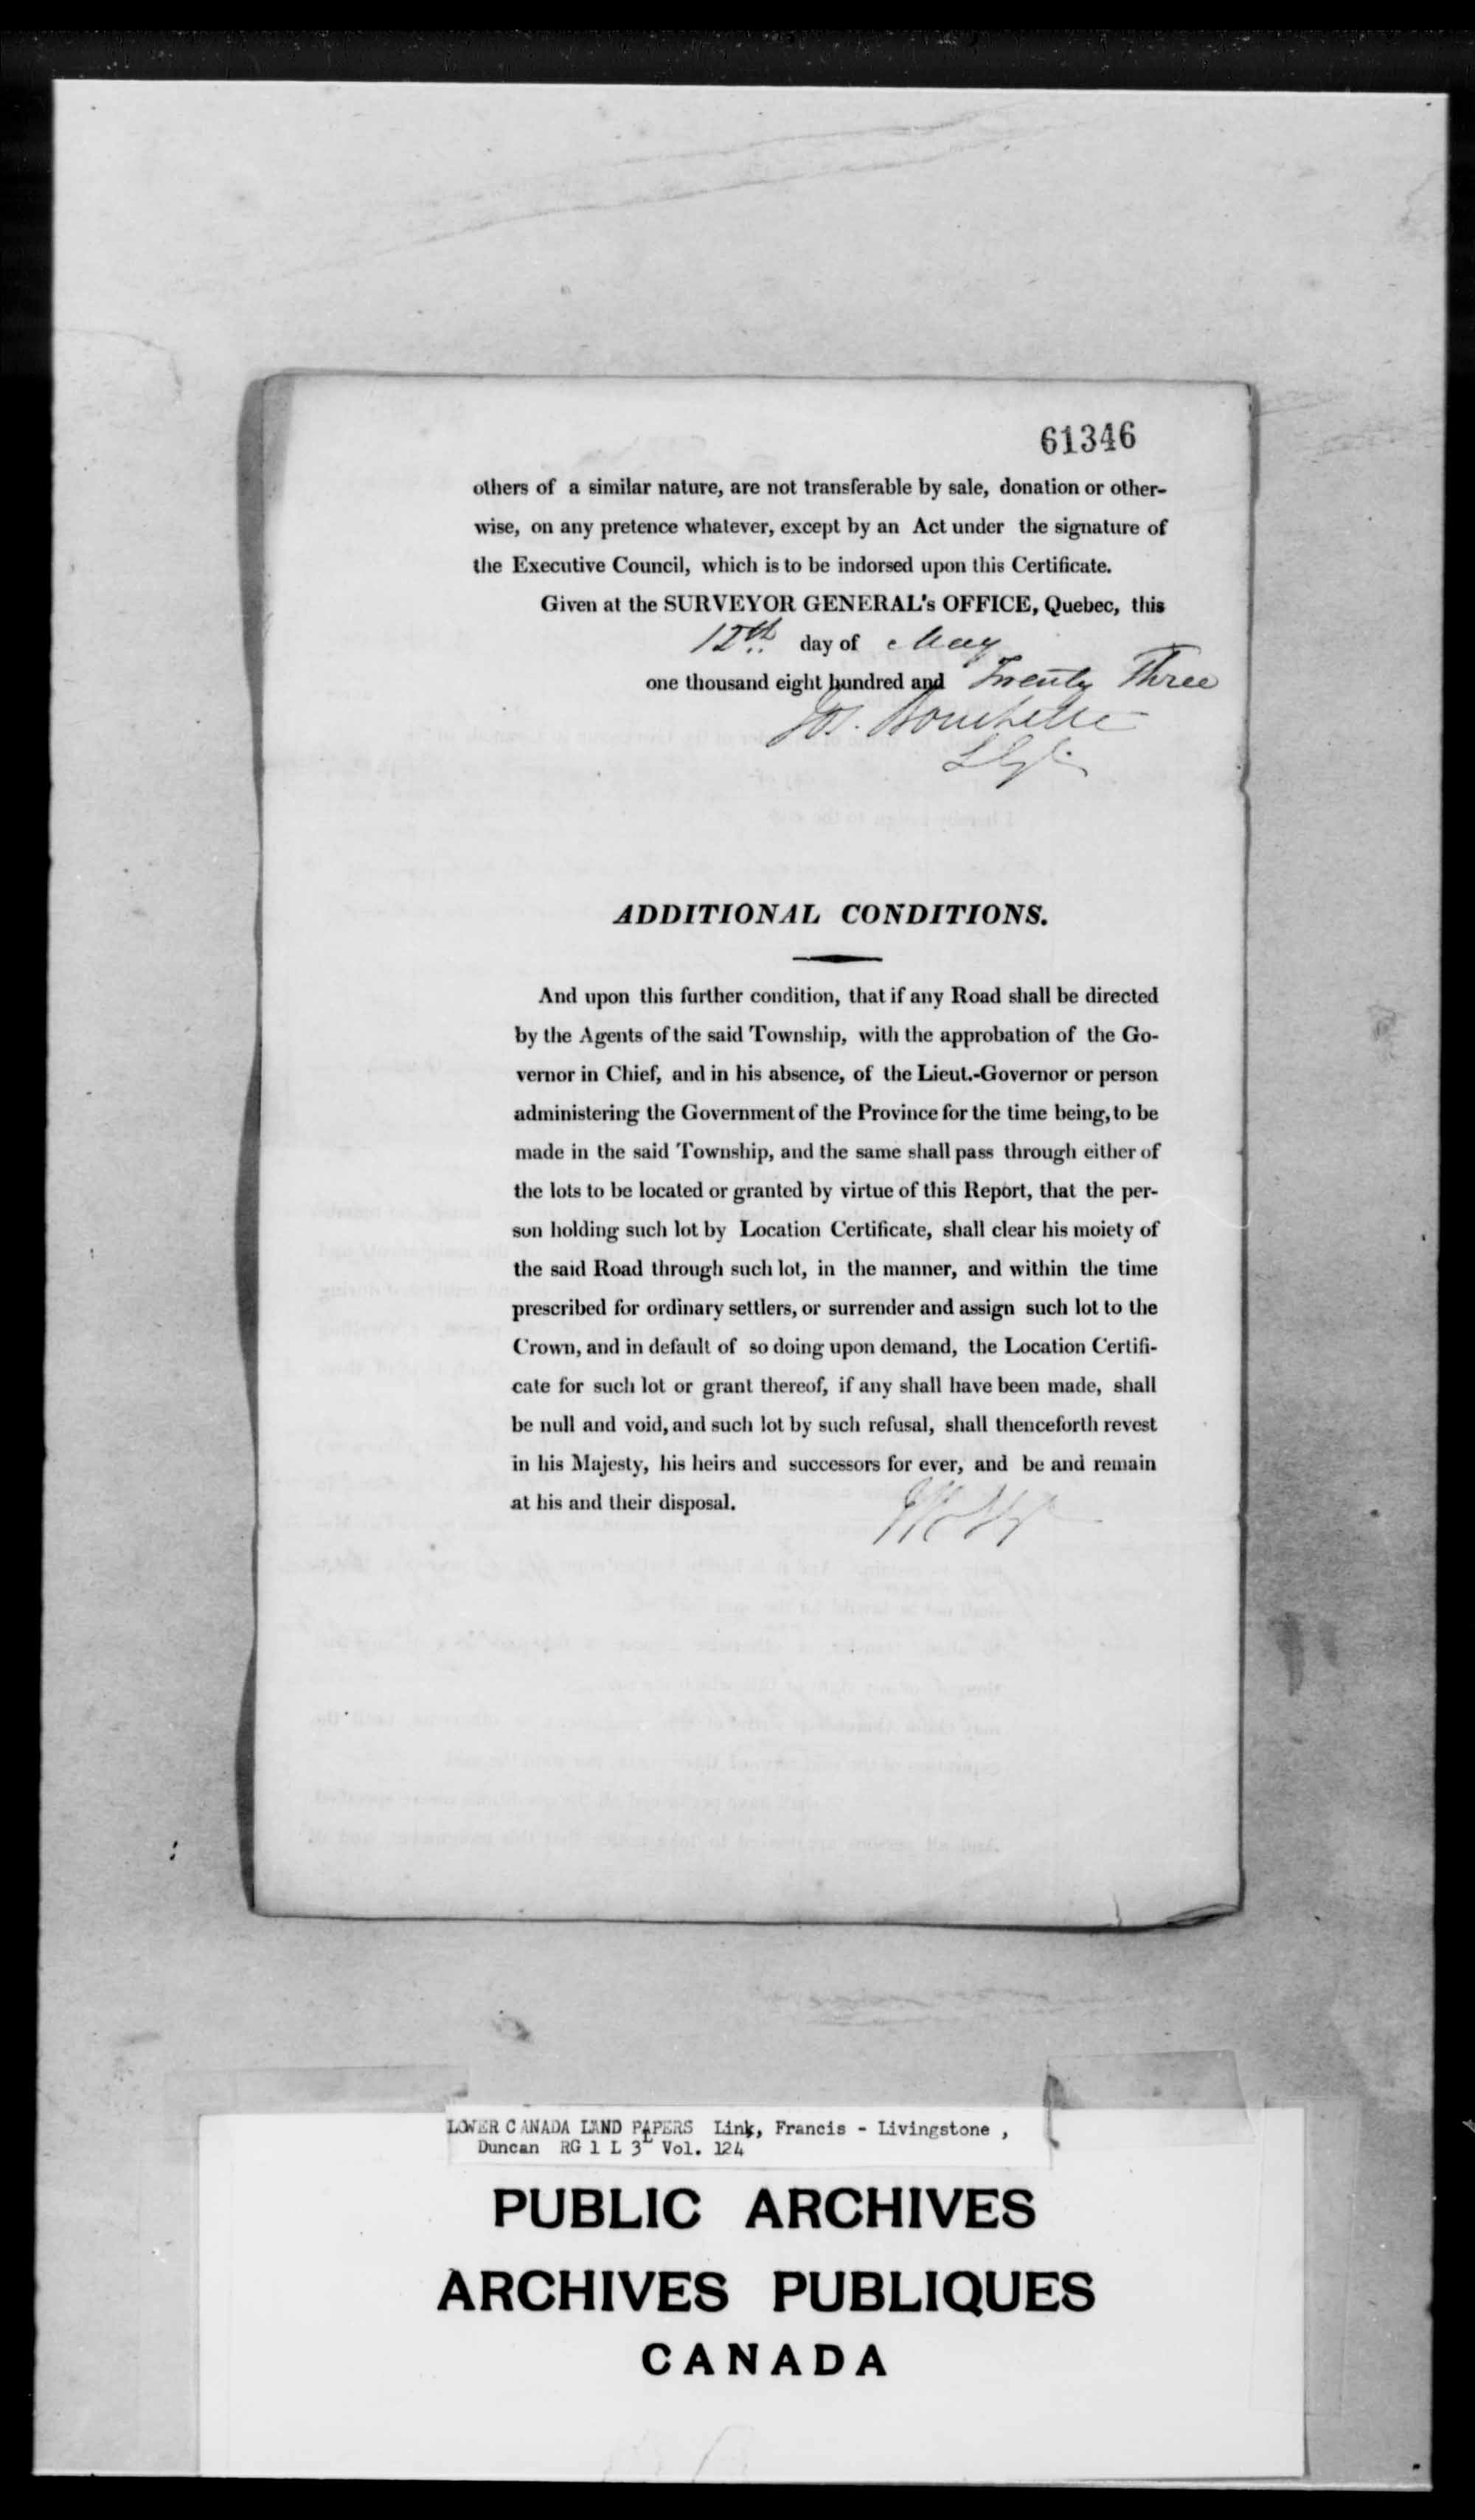 Digitized page of  for Image No.: e008706195